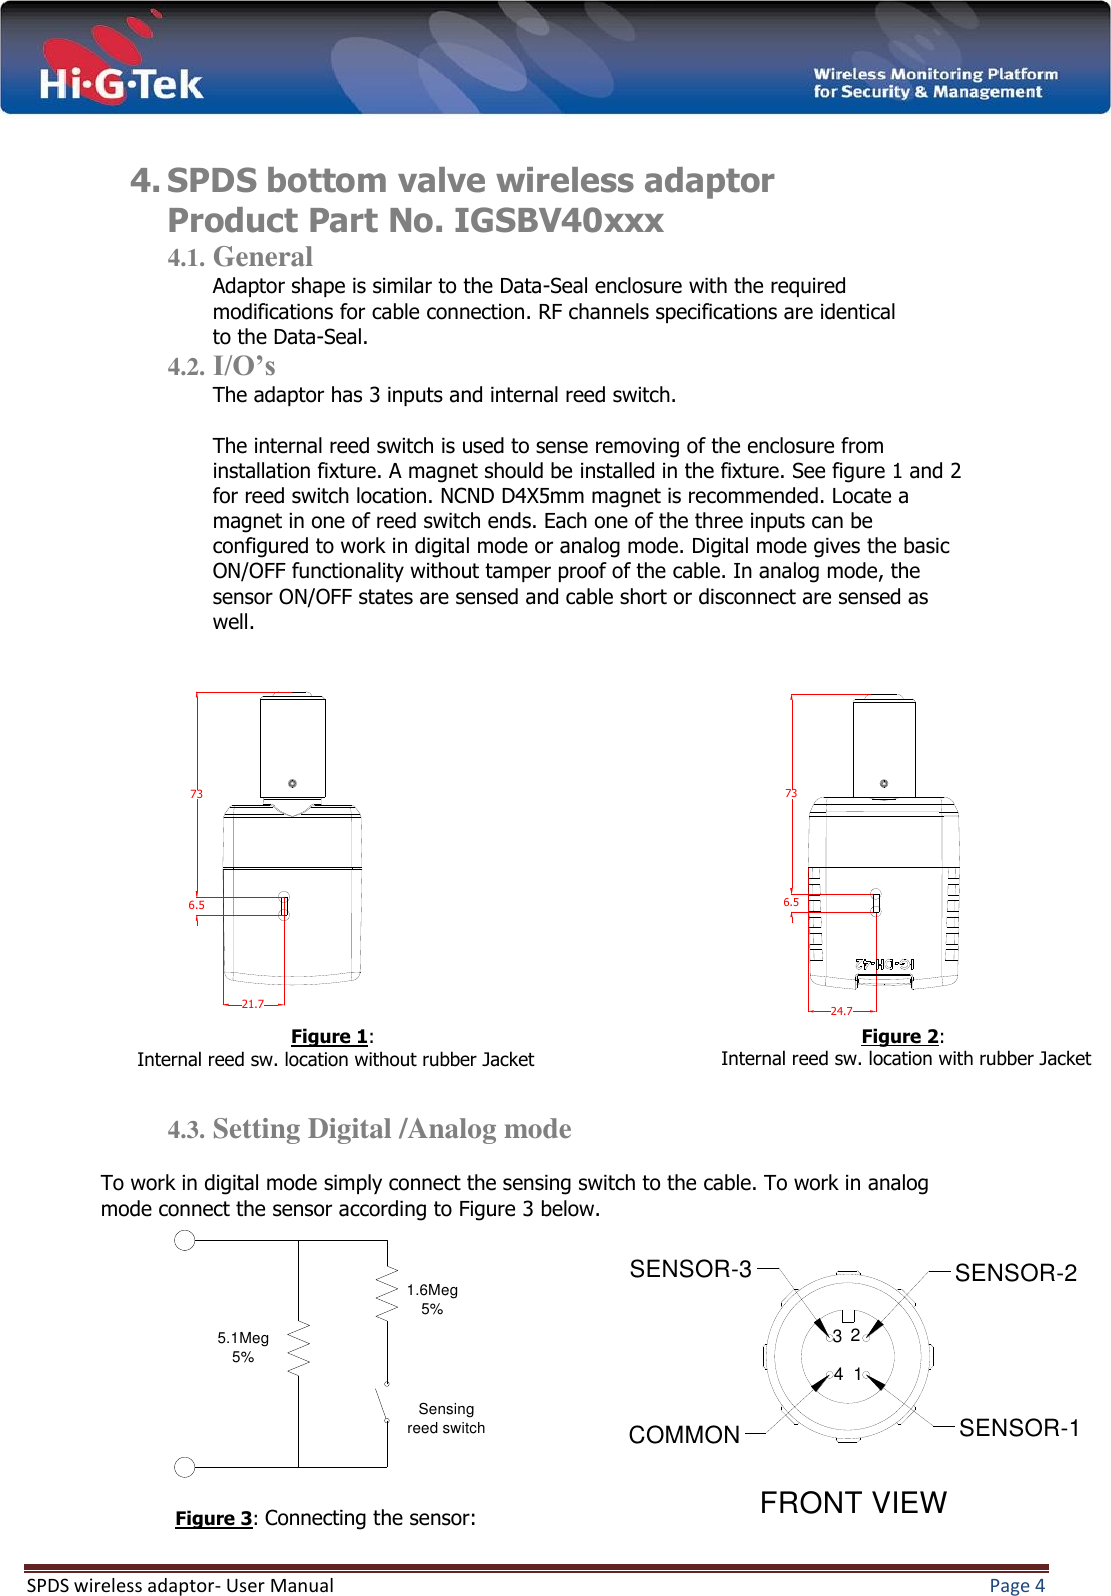  SPDS wireless adaptor- User Manual  Page 4   4. SPDS bottom valve wireless adaptor  Product Part No. IGSBV40xxx 4.1. General Adaptor shape is similar to the Data-Seal enclosure with the required modifications for cable connection. RF channels specifications are identical to the Data-Seal. 4.2. I/O’s The adaptor has 3 inputs and internal reed switch.  The internal reed switch is used to sense removing of the enclosure from installation fixture. A magnet should be installed in the fixture. See figure 1 and 2 for reed switch location. NCND D4X5mm magnet is recommended. Locate a magnet in one of reed switch ends. Each one of the three inputs can be configured to work in digital mode or analog mode. Digital mode gives the basic ON/OFF functionality without tamper proof of the cable. In analog mode, the sensor ON/OFF states are sensed and cable short or disconnect are sensed as well.                    4.3. Setting Digital /Analog mode   To work in digital mode simply connect the sensing switch to the cable. To work in analog mode connect the sensor according to Figure 3 below.         21.7736.5736.524.7Figure 3: Connecting the sensor: : 2Figure  Internal reed sw. location with rubber Jacket 1.6Meg 5%Sensing reed switch5.1Meg 5%: 1Figure  Internal reed sw. location without rubber Jacket SENSOR-3COMMONSENSOR-2SENSOR-1FRONT VIEW1234